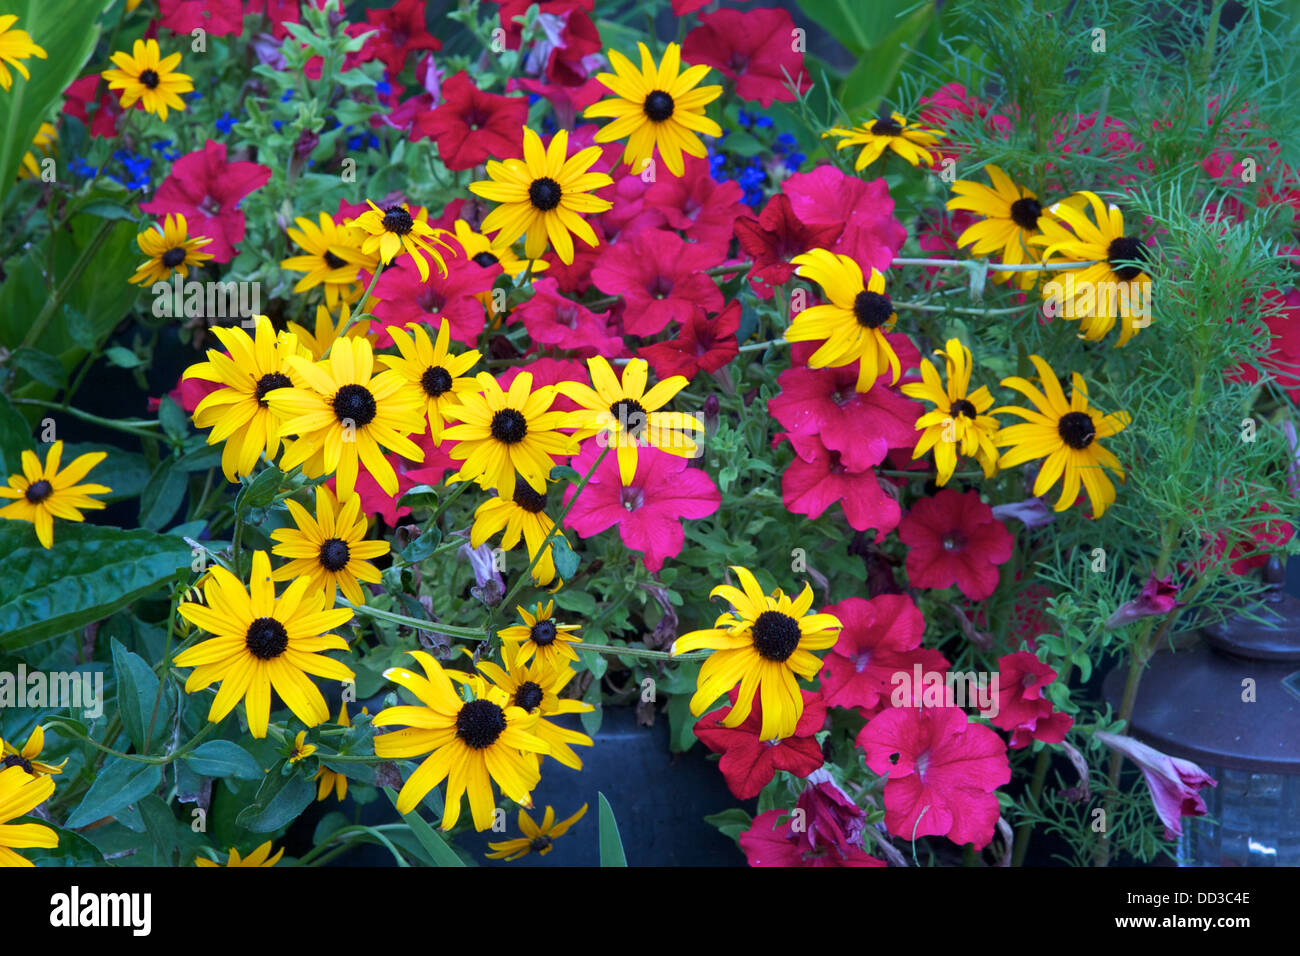 Black-eyed-susans and petunias growing in a container Stock Photo